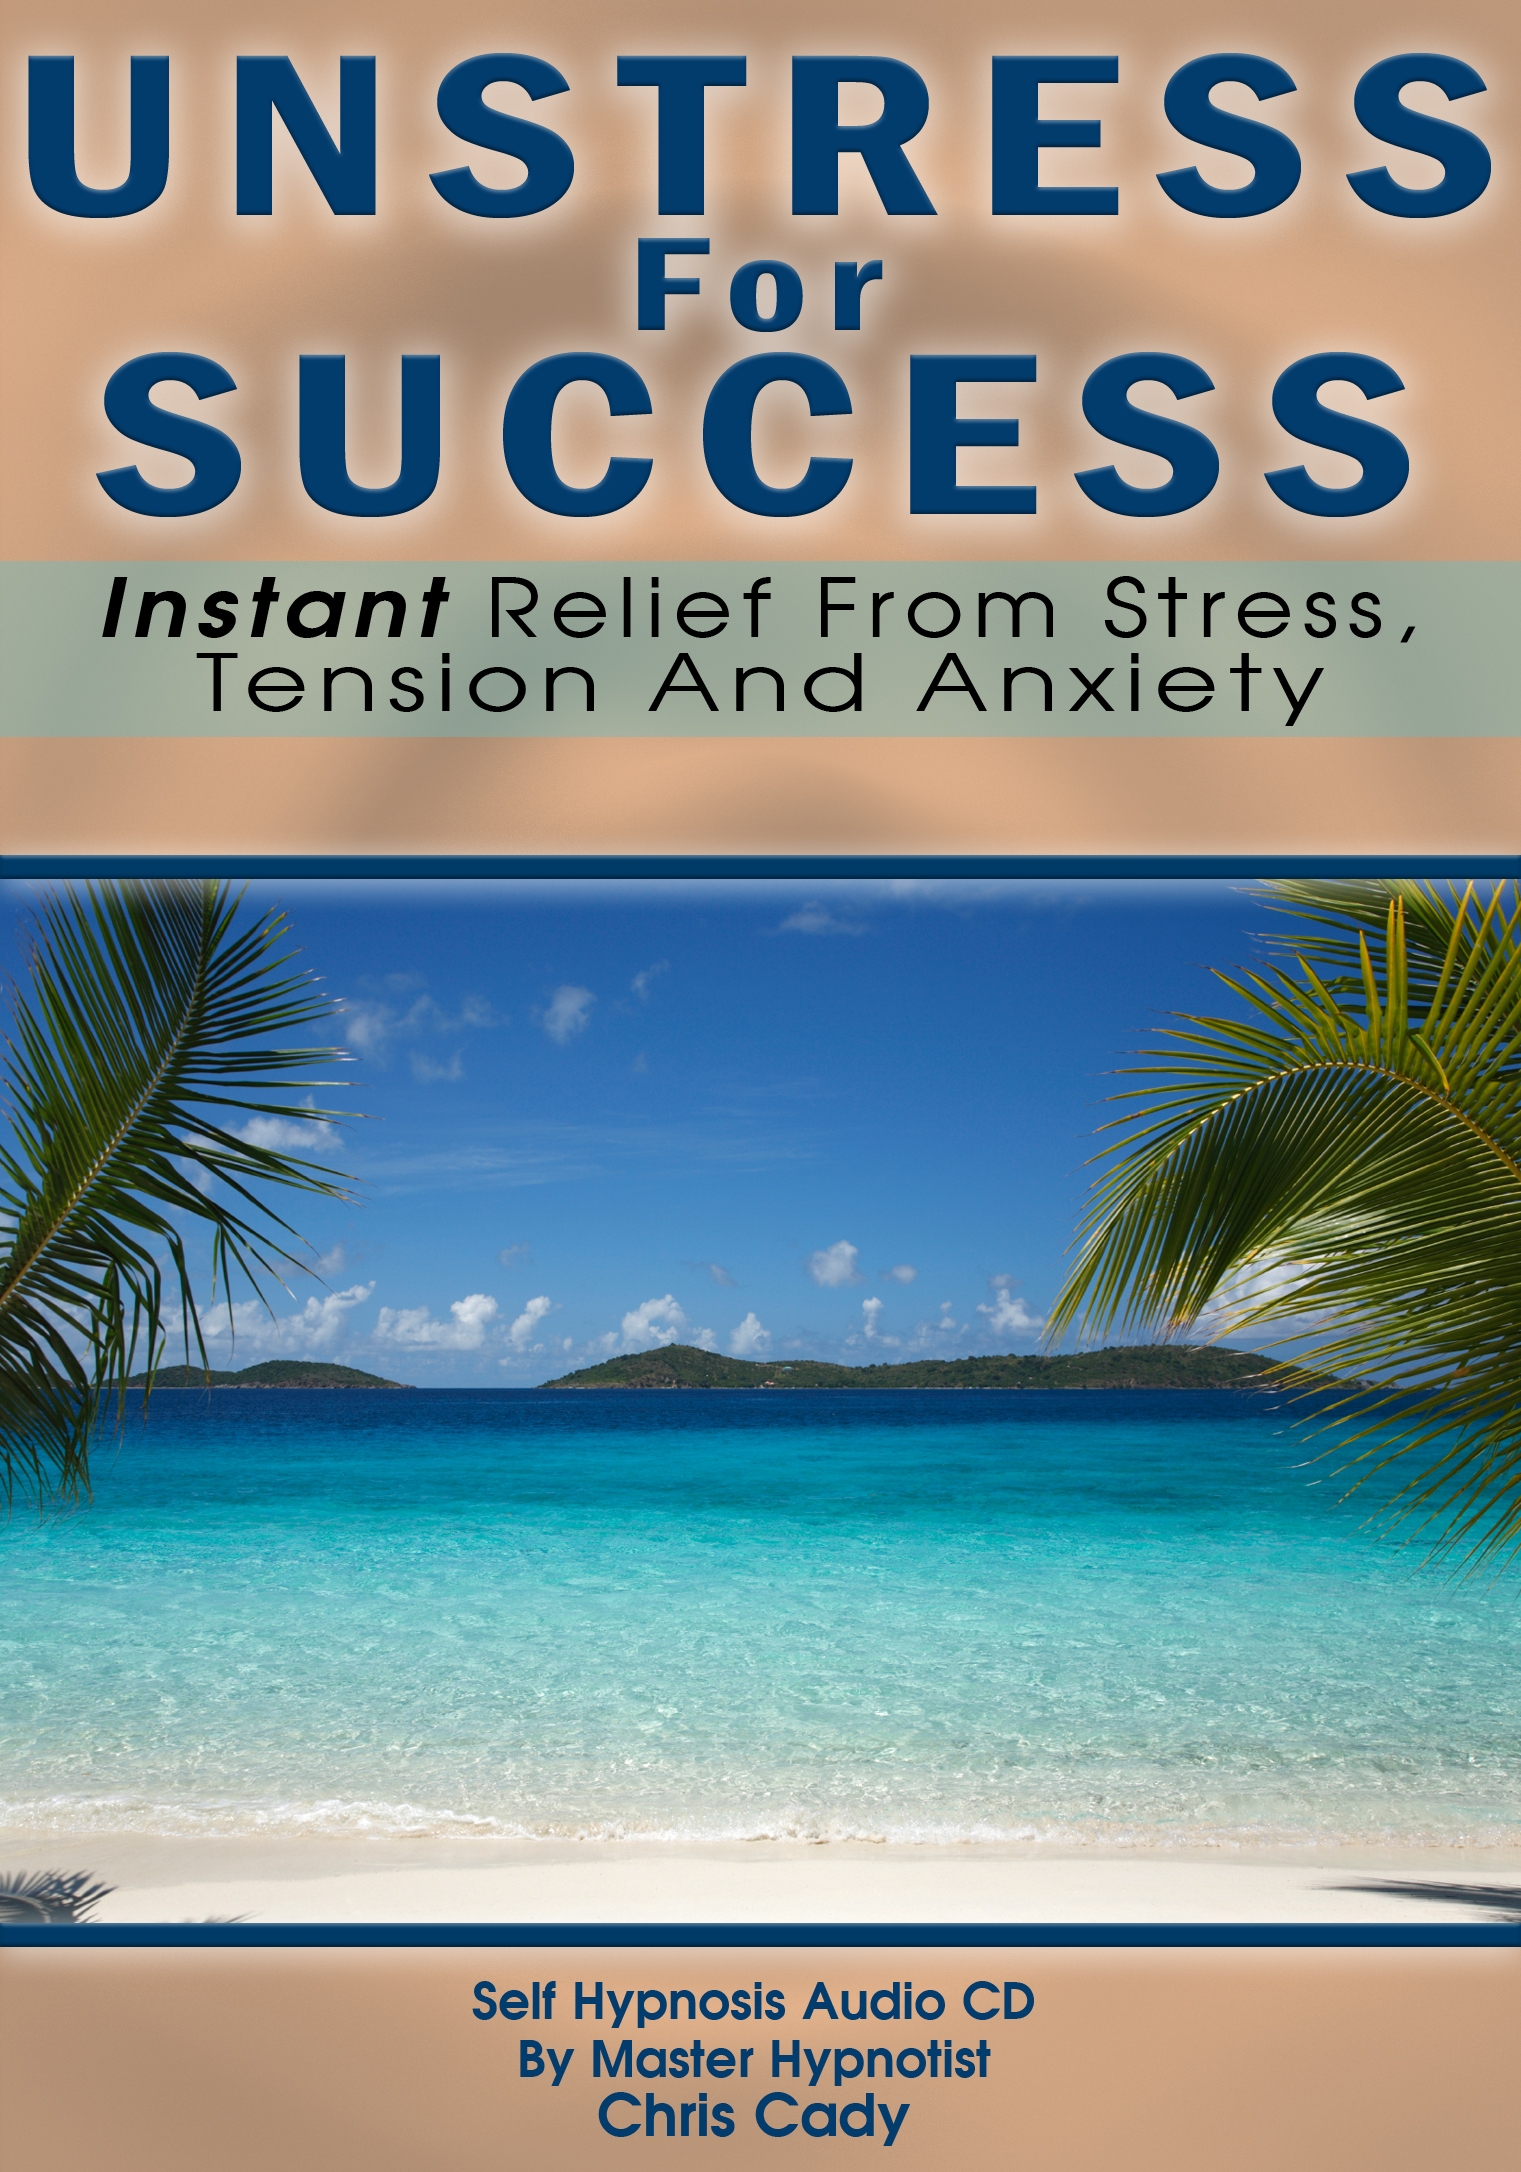 unstress for success with hypnosis cd mp3 download program